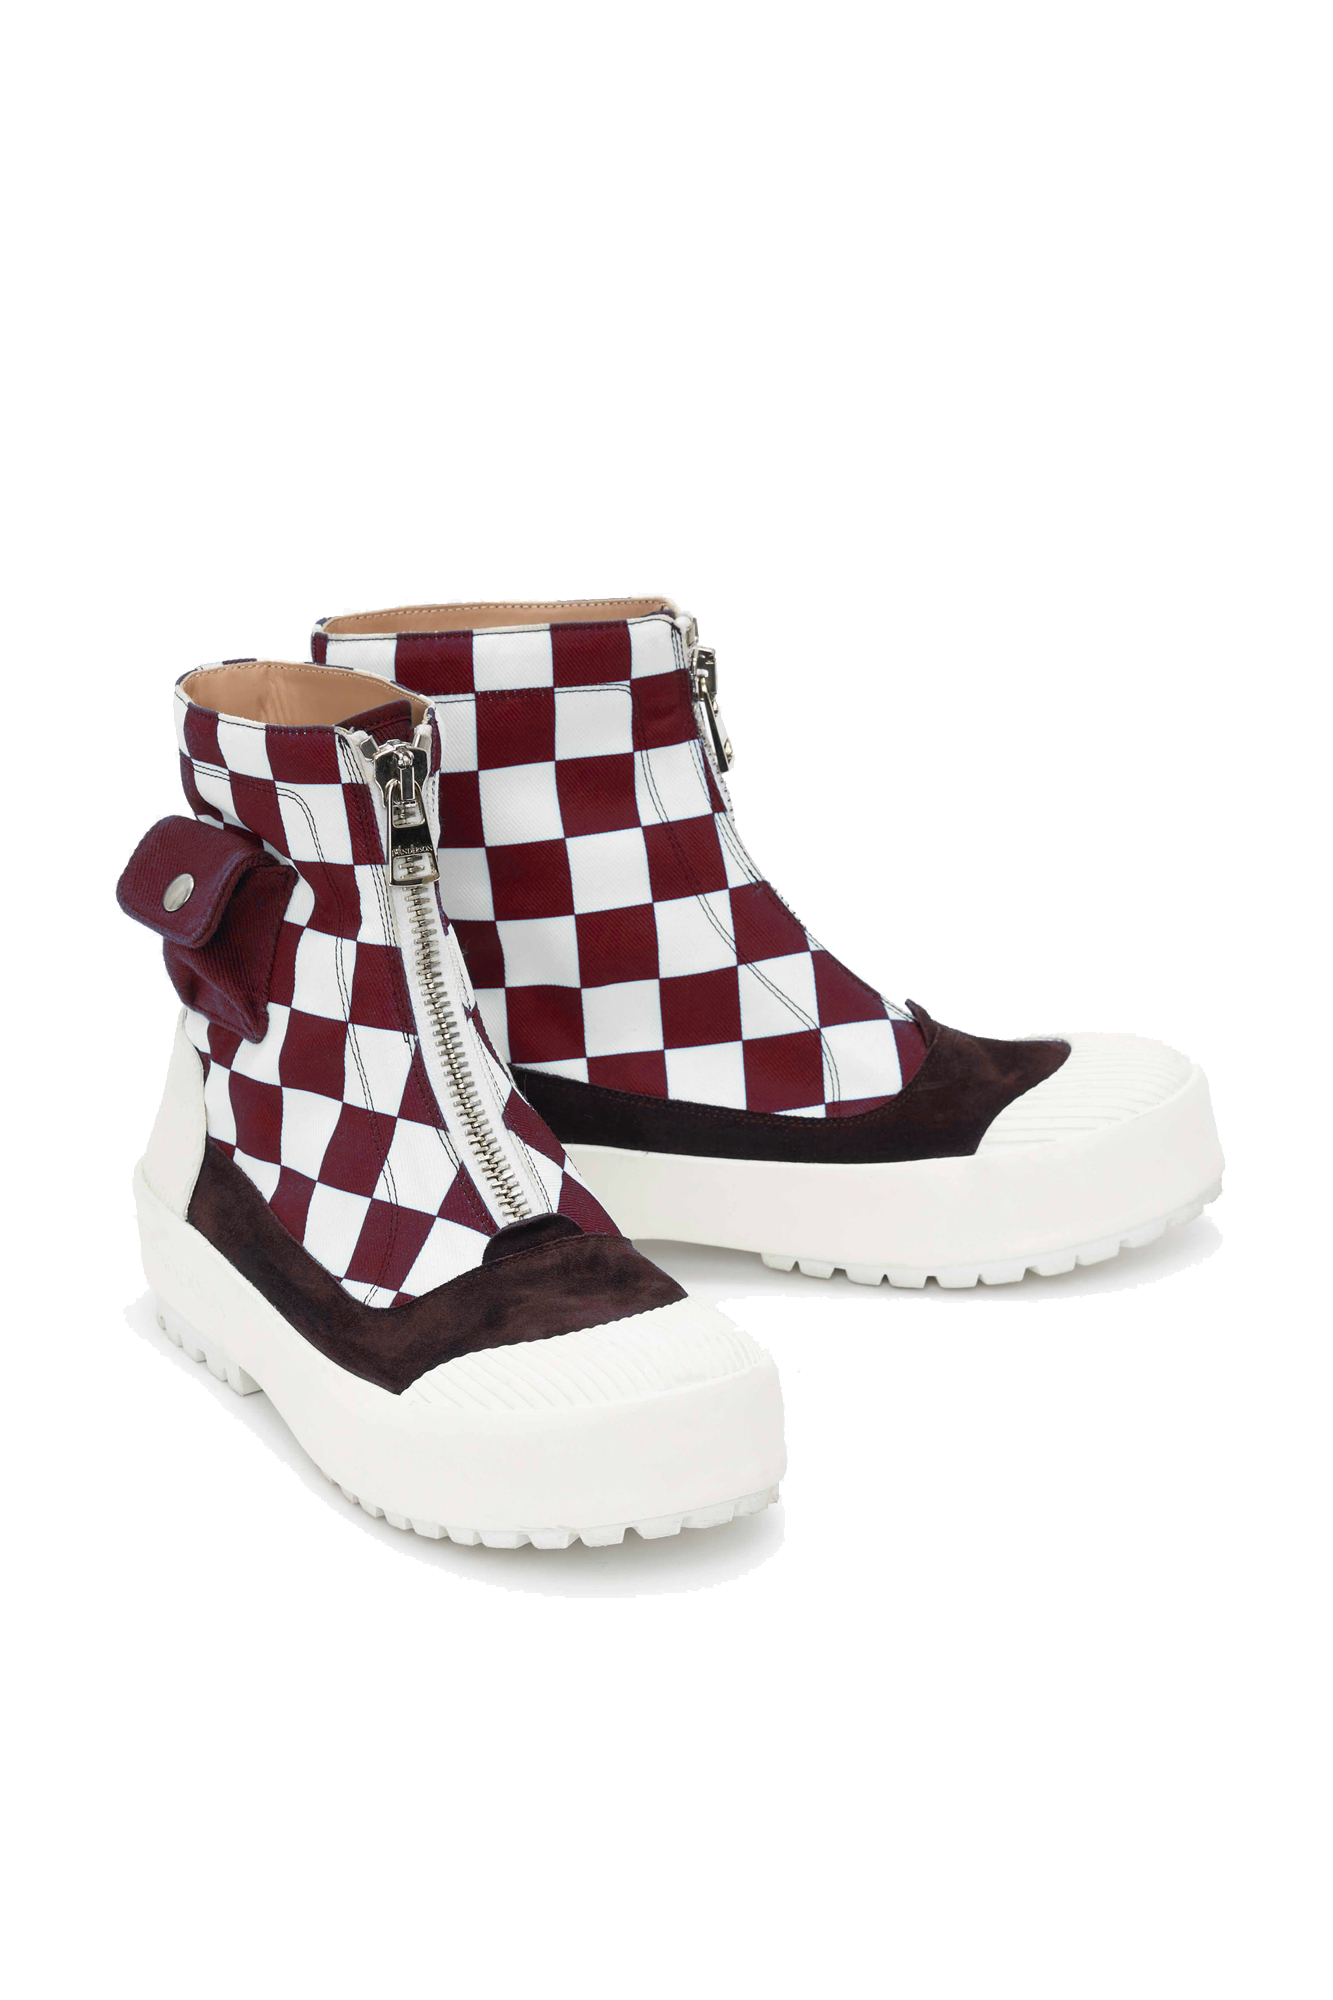 DUCK BOOT IN RED CHECK